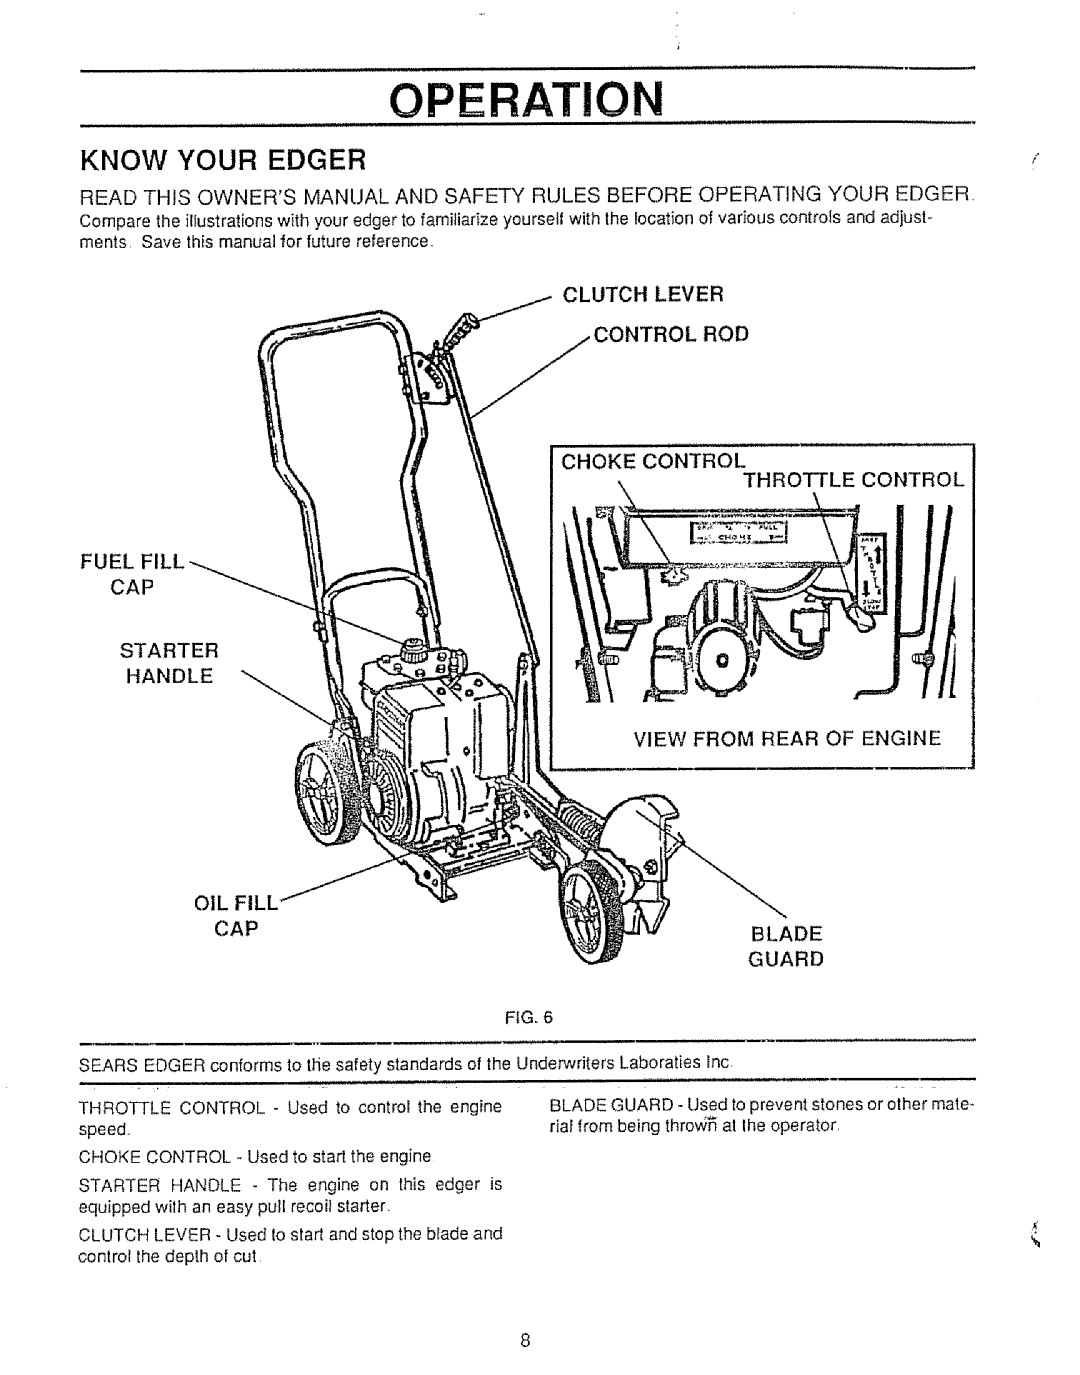 Sears 536.79751 owner manual Operation, Know Your Edger, Ontrol Rod 